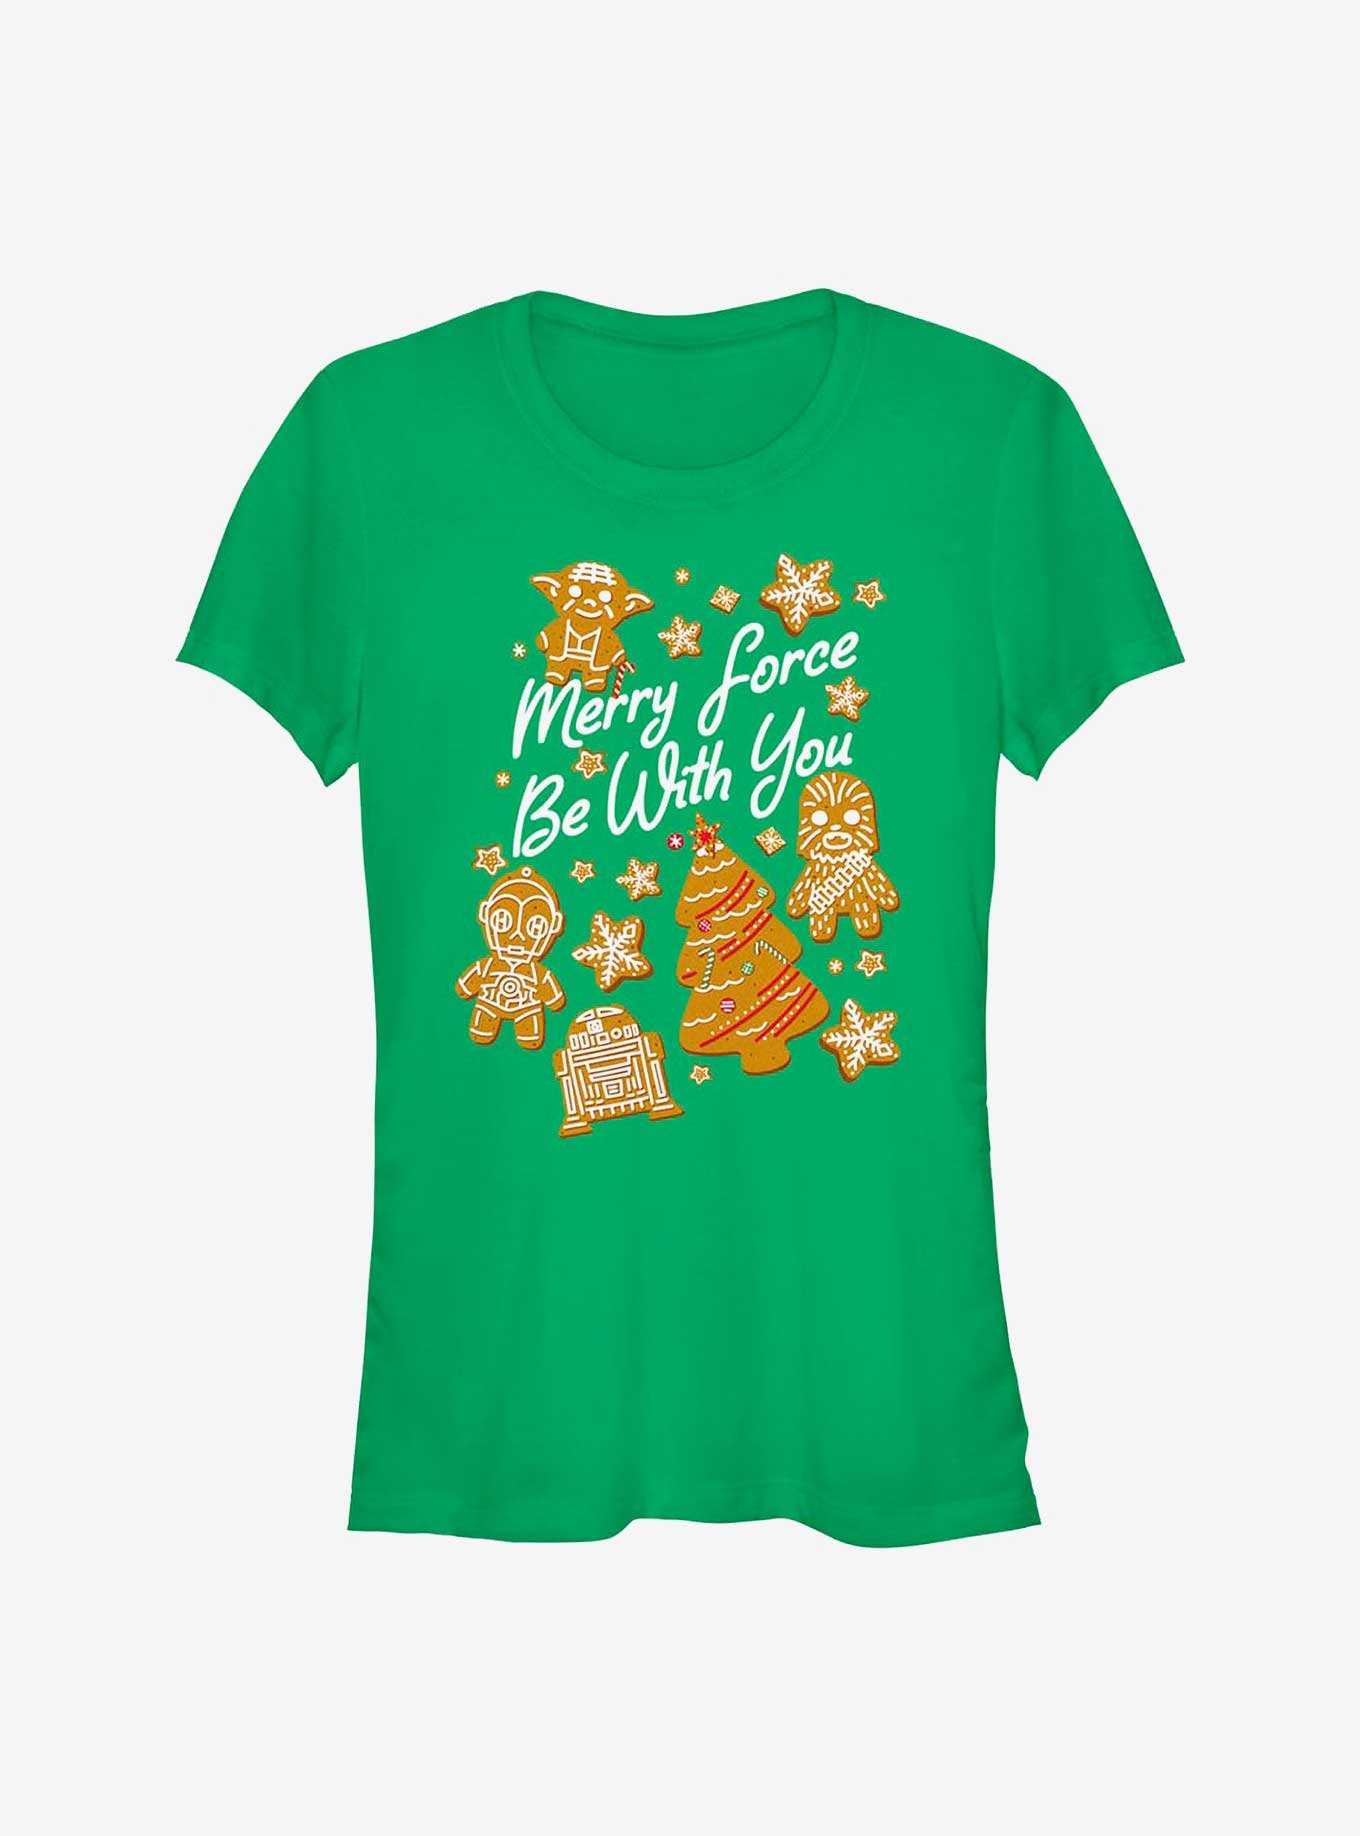 Star Wars Merry Force Be With You Cookies Girls T-Shirt, , hi-res